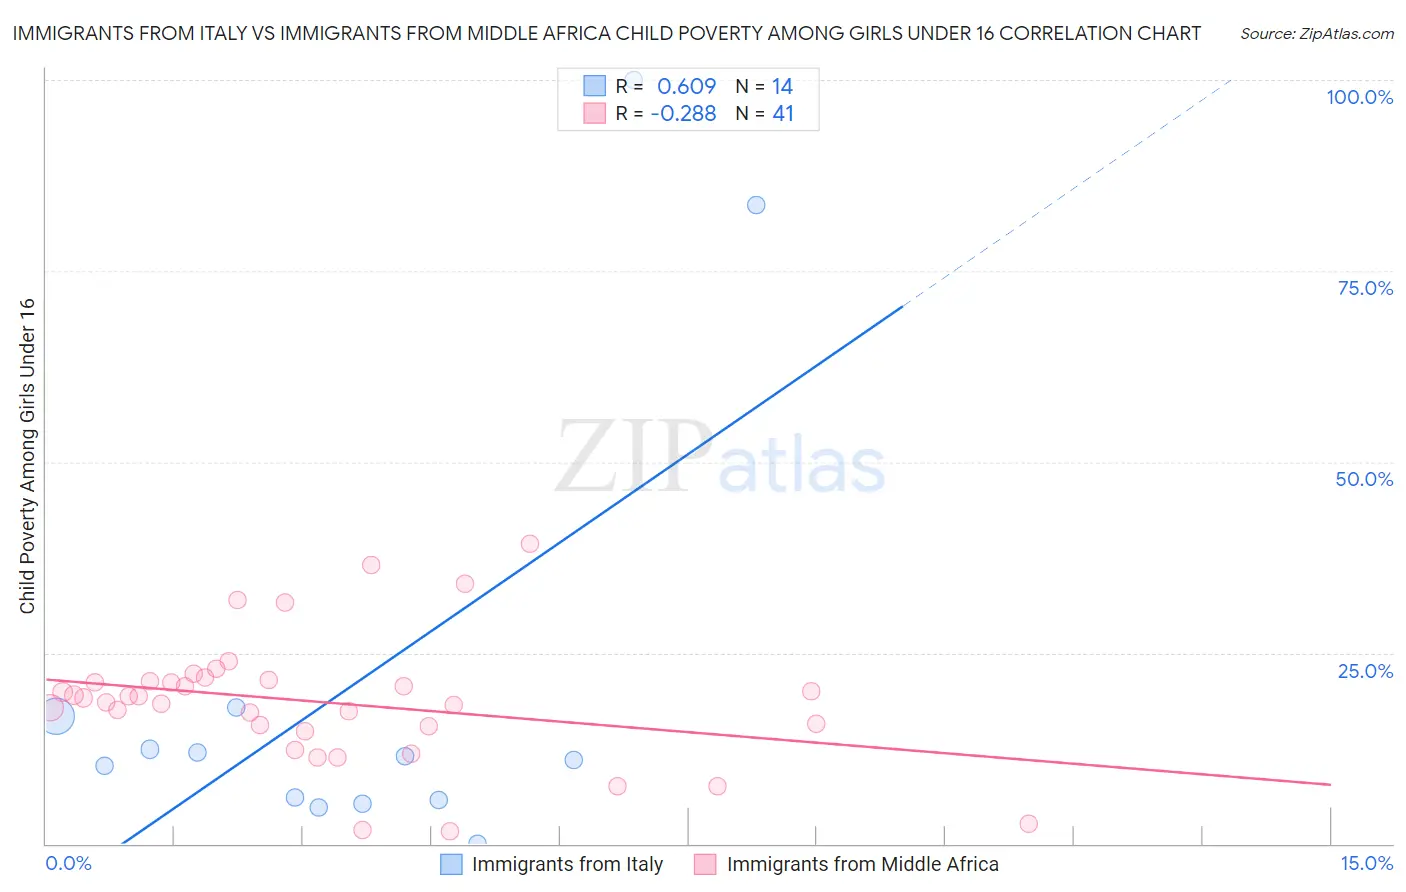 Immigrants from Italy vs Immigrants from Middle Africa Child Poverty Among Girls Under 16